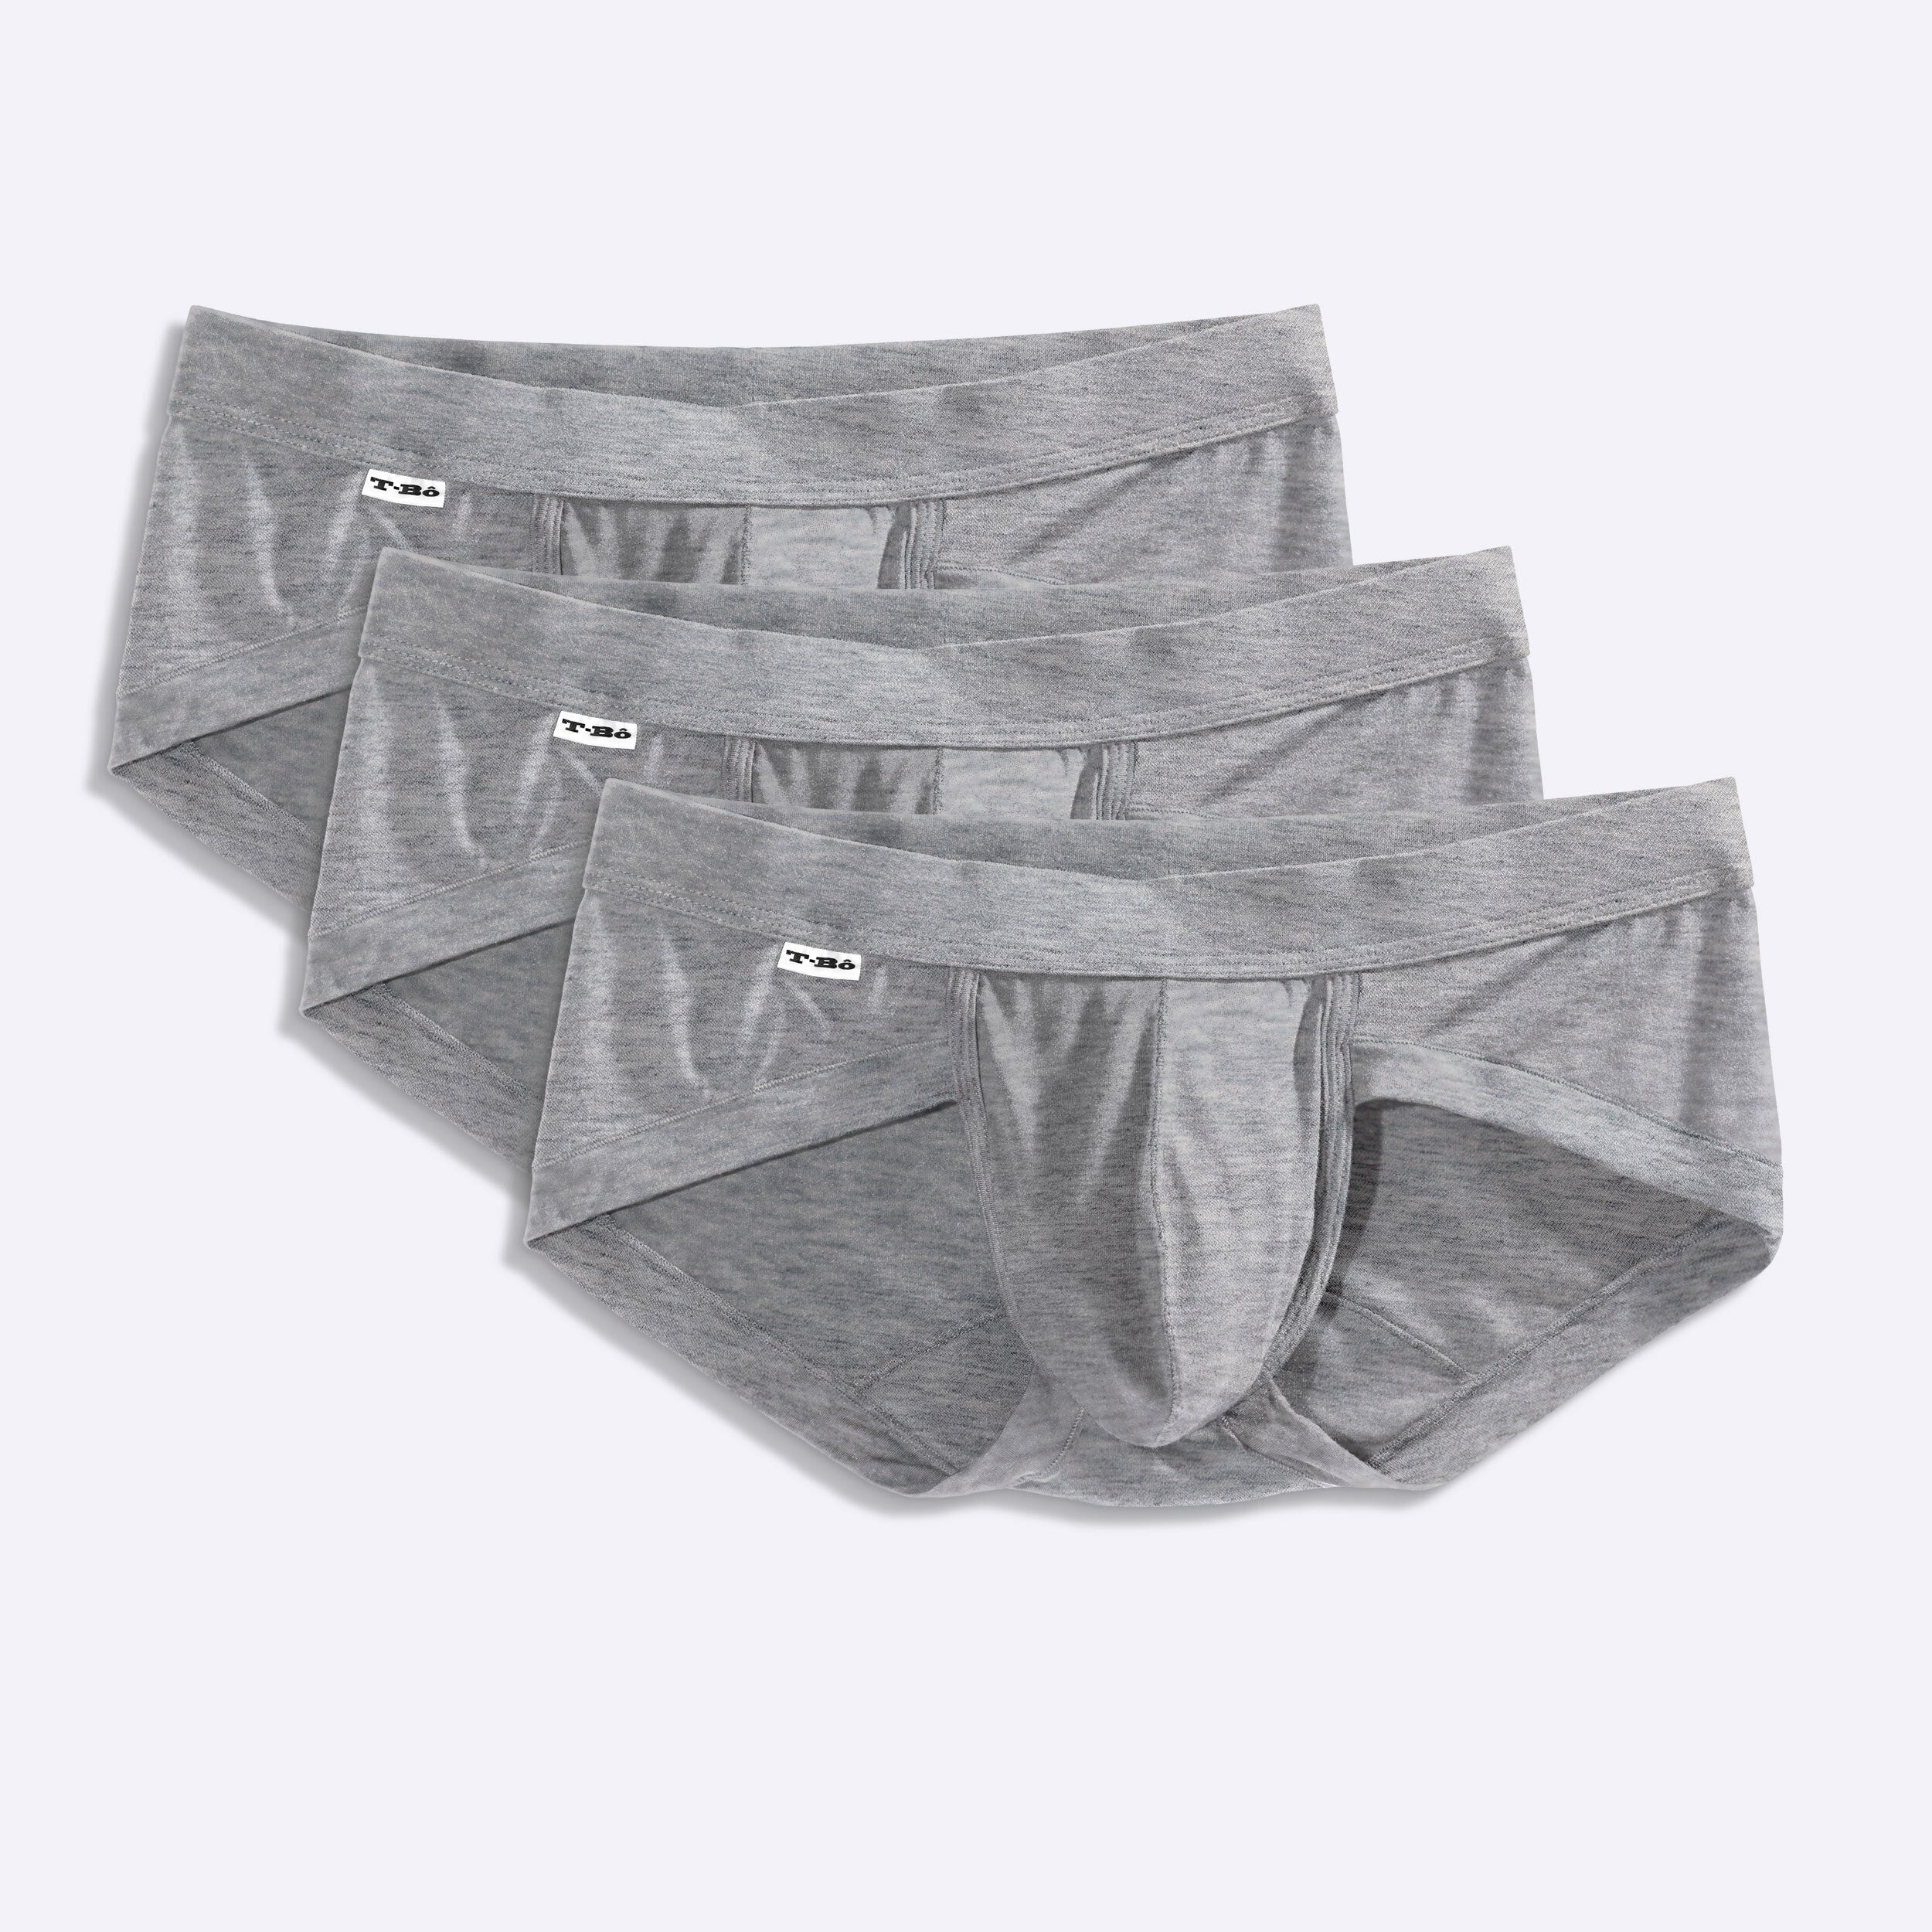 Buy The TBô Men Brief 3 Pack, Black, Small at